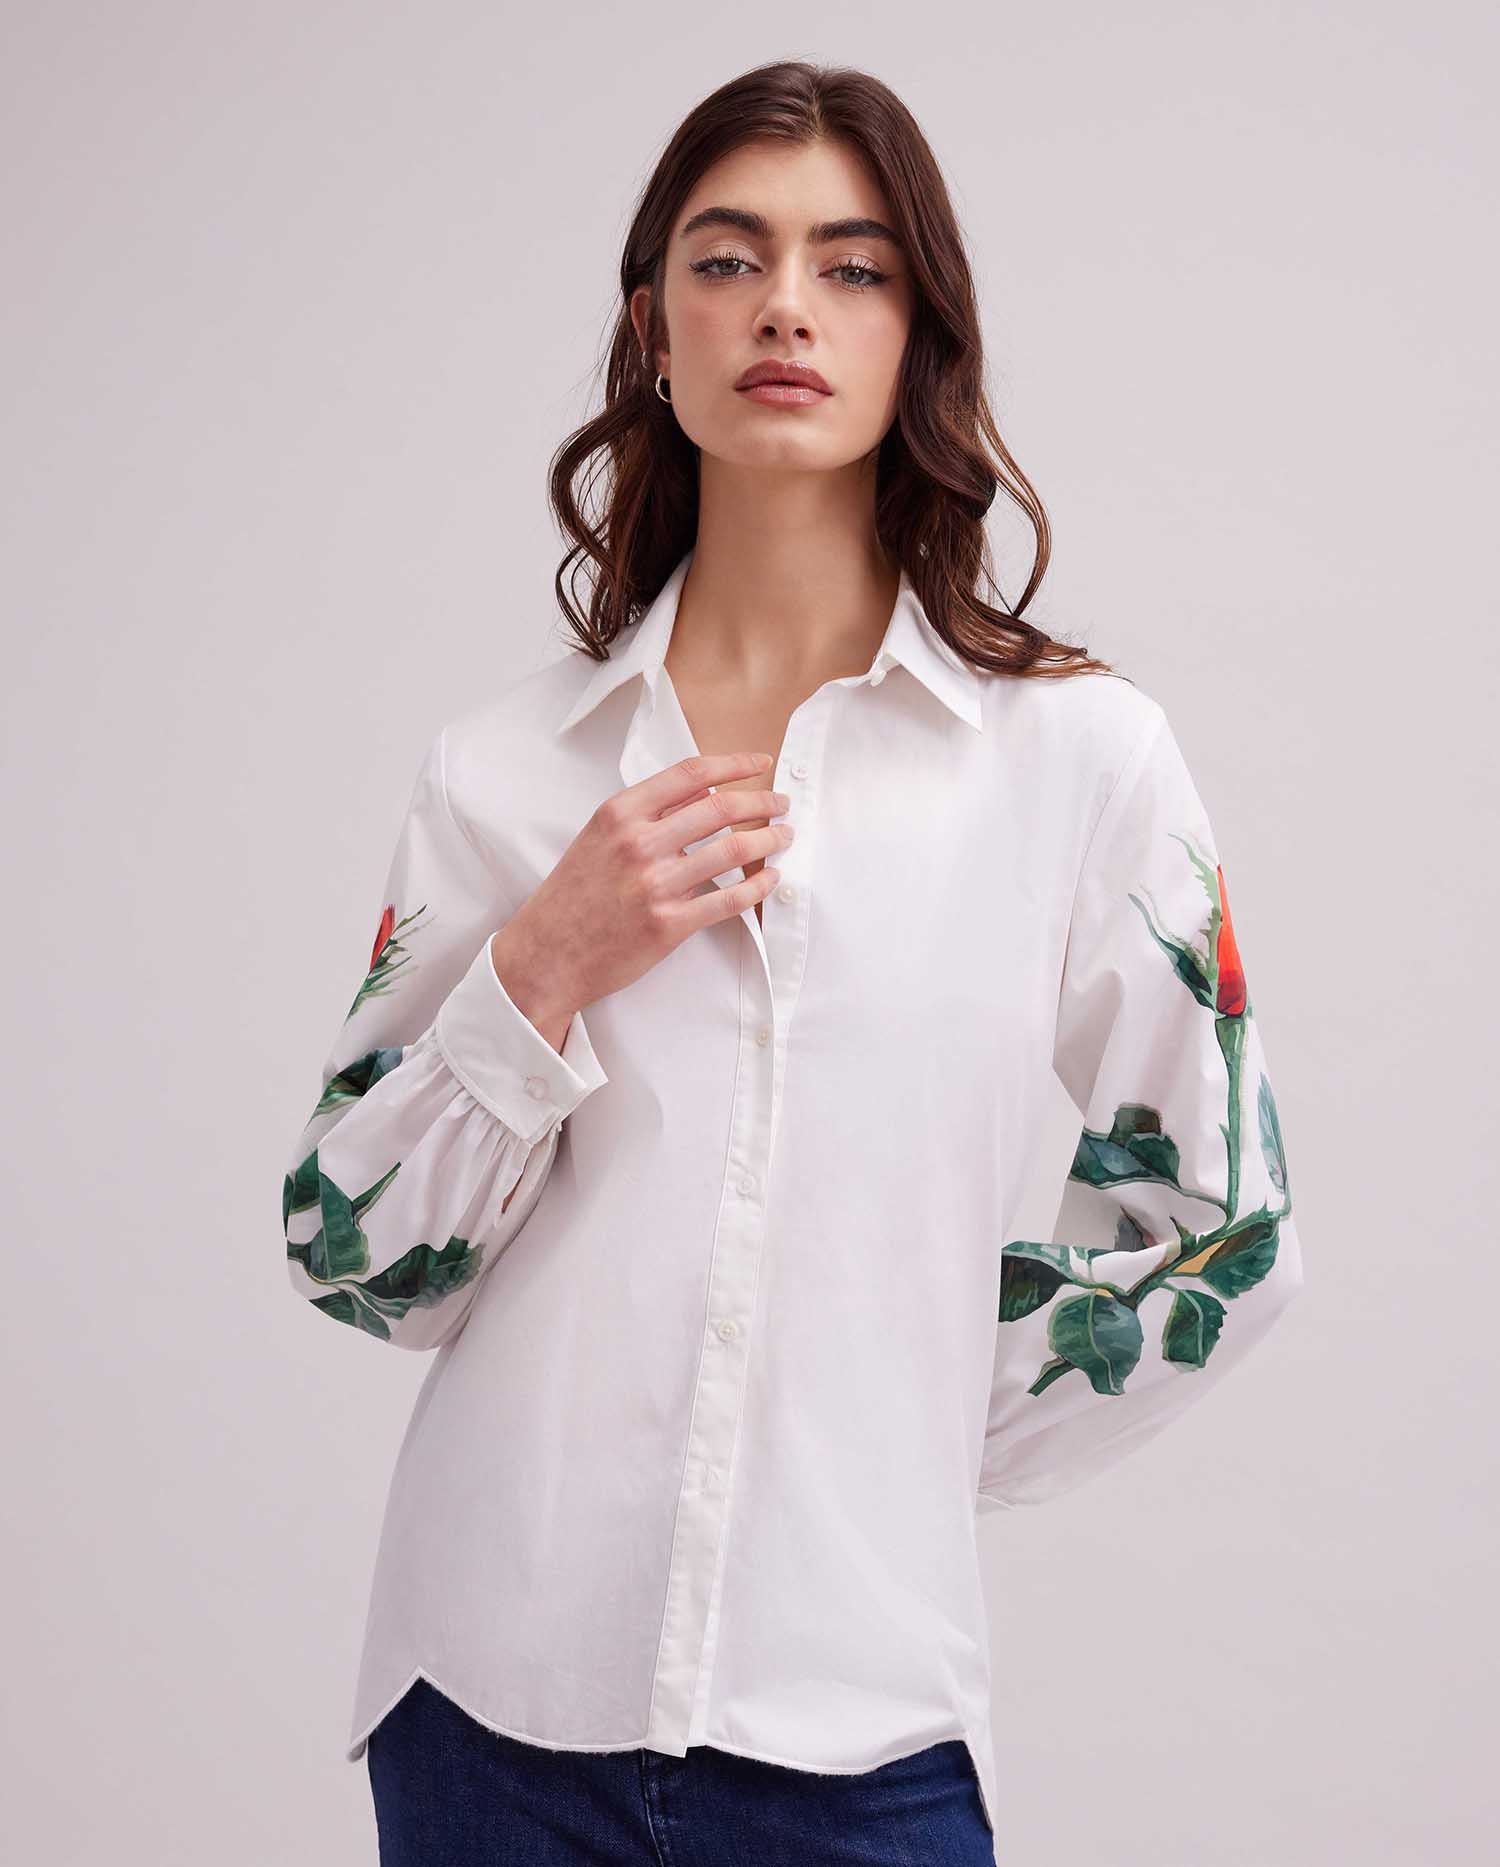 Discover the FLOWER white oversized shirt with floral embellishment from ANNE FONTAINE